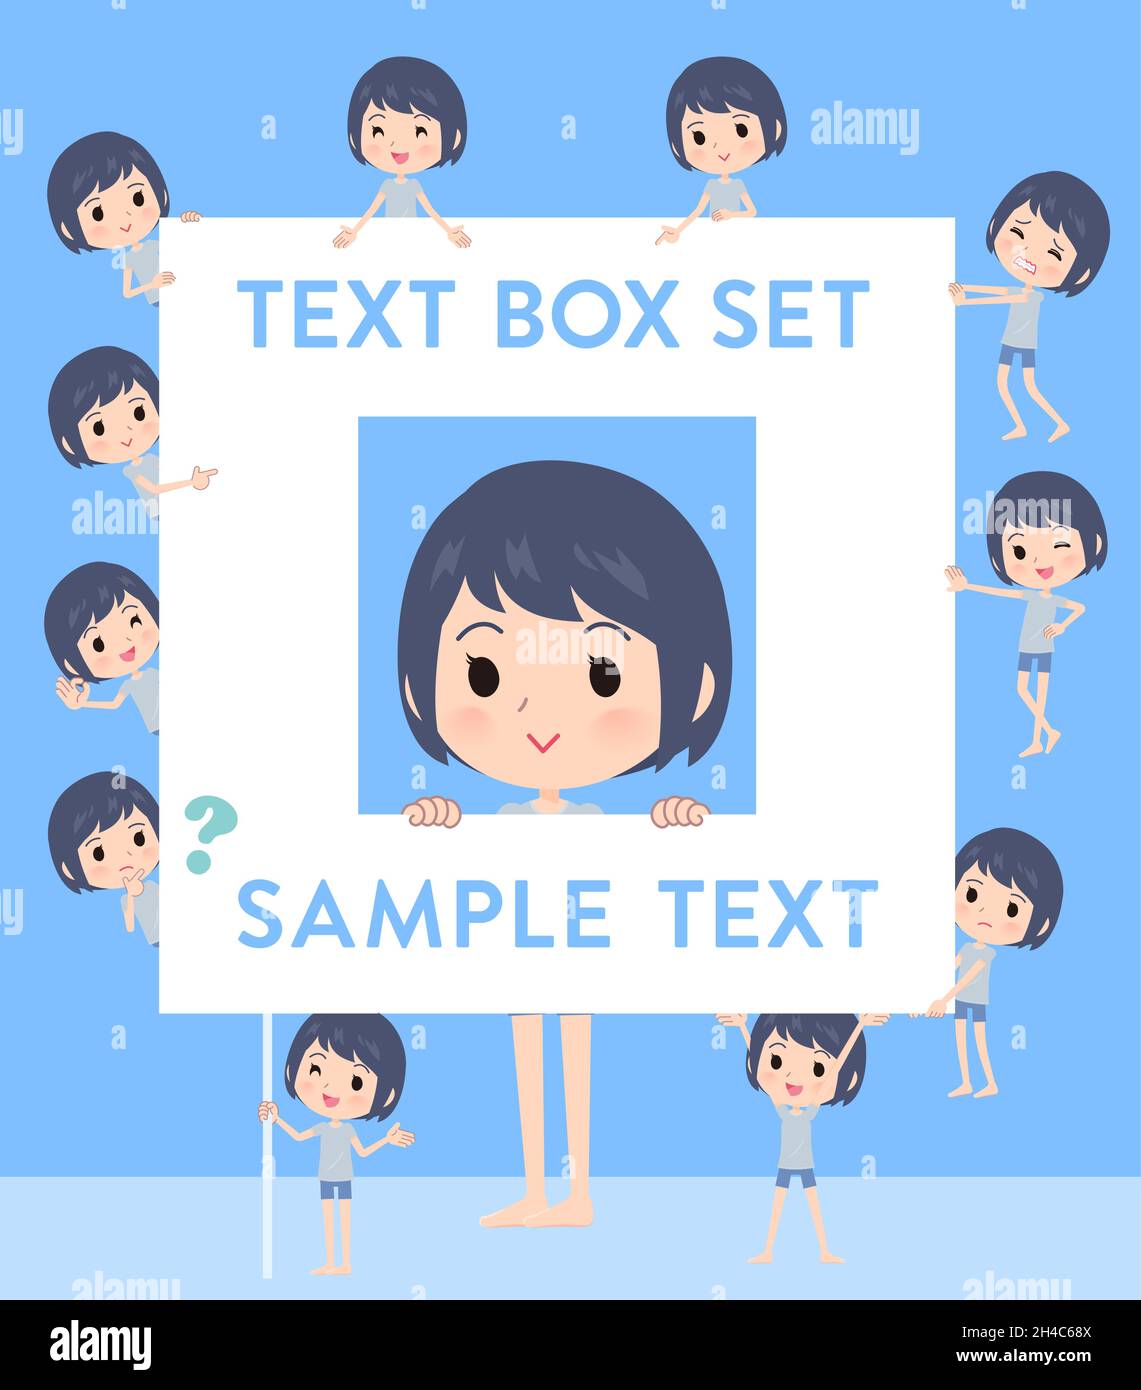 A set of unpaid avatar women with a message board.Since each is divided, you can move it freely.It's vector art so easy to edit. Stock Vector